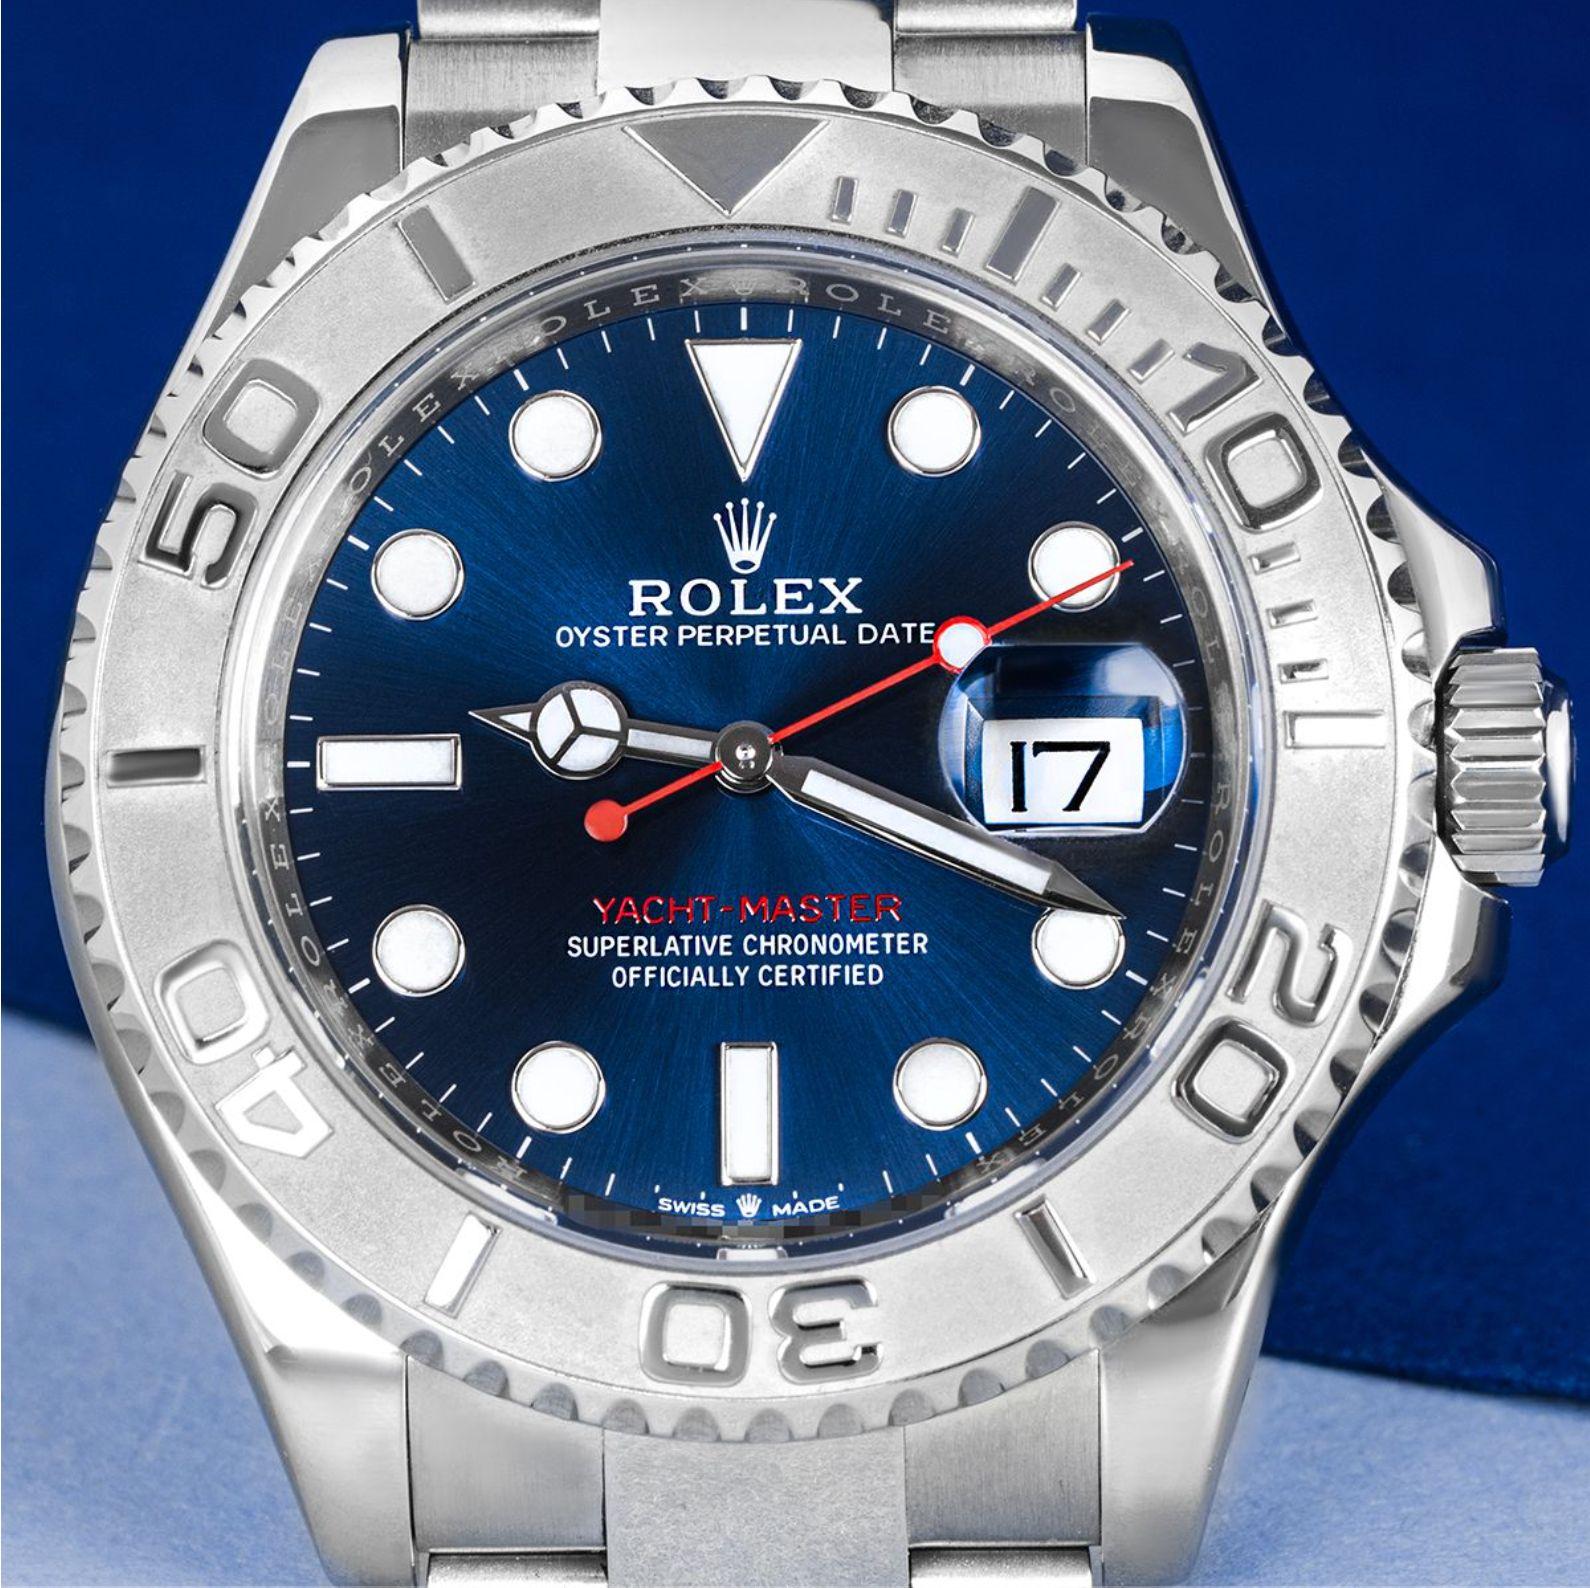 A 40mm Yacht-Master in stainless steel by Rolex. Featuring a bright blue dial with a date aperture and a platinum bi-directional rotatable bezel, with raised 60-minute numerals and graduations.

Fitted with scratch-resistant sapphire crystal and a